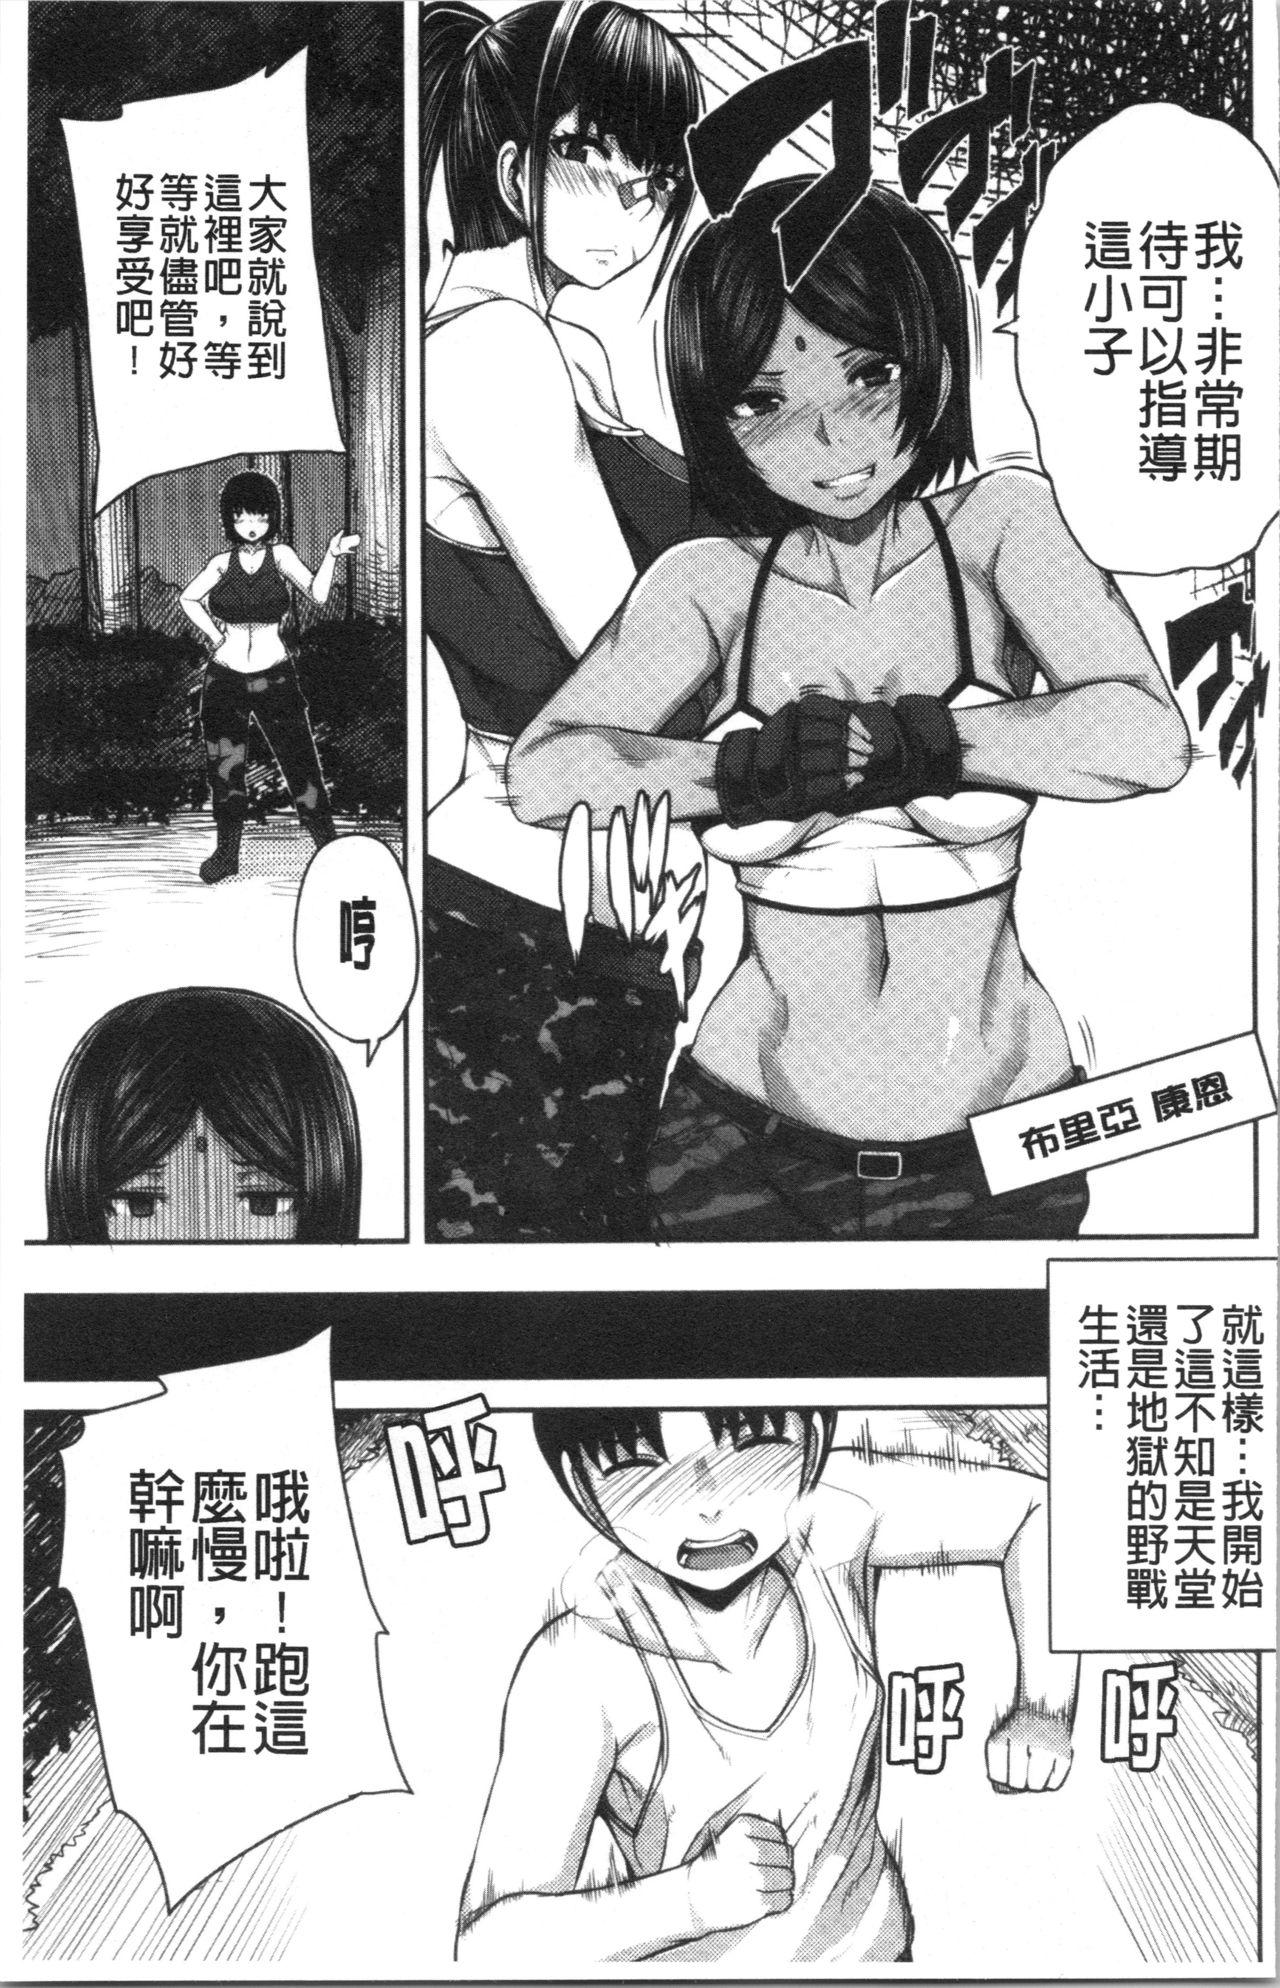 Double Blowjob [Yutakame] Onee-chan BOOT CAMP ni Youkoso! - Sister’s Boot Camp [Chinese] Cbt - Page 11